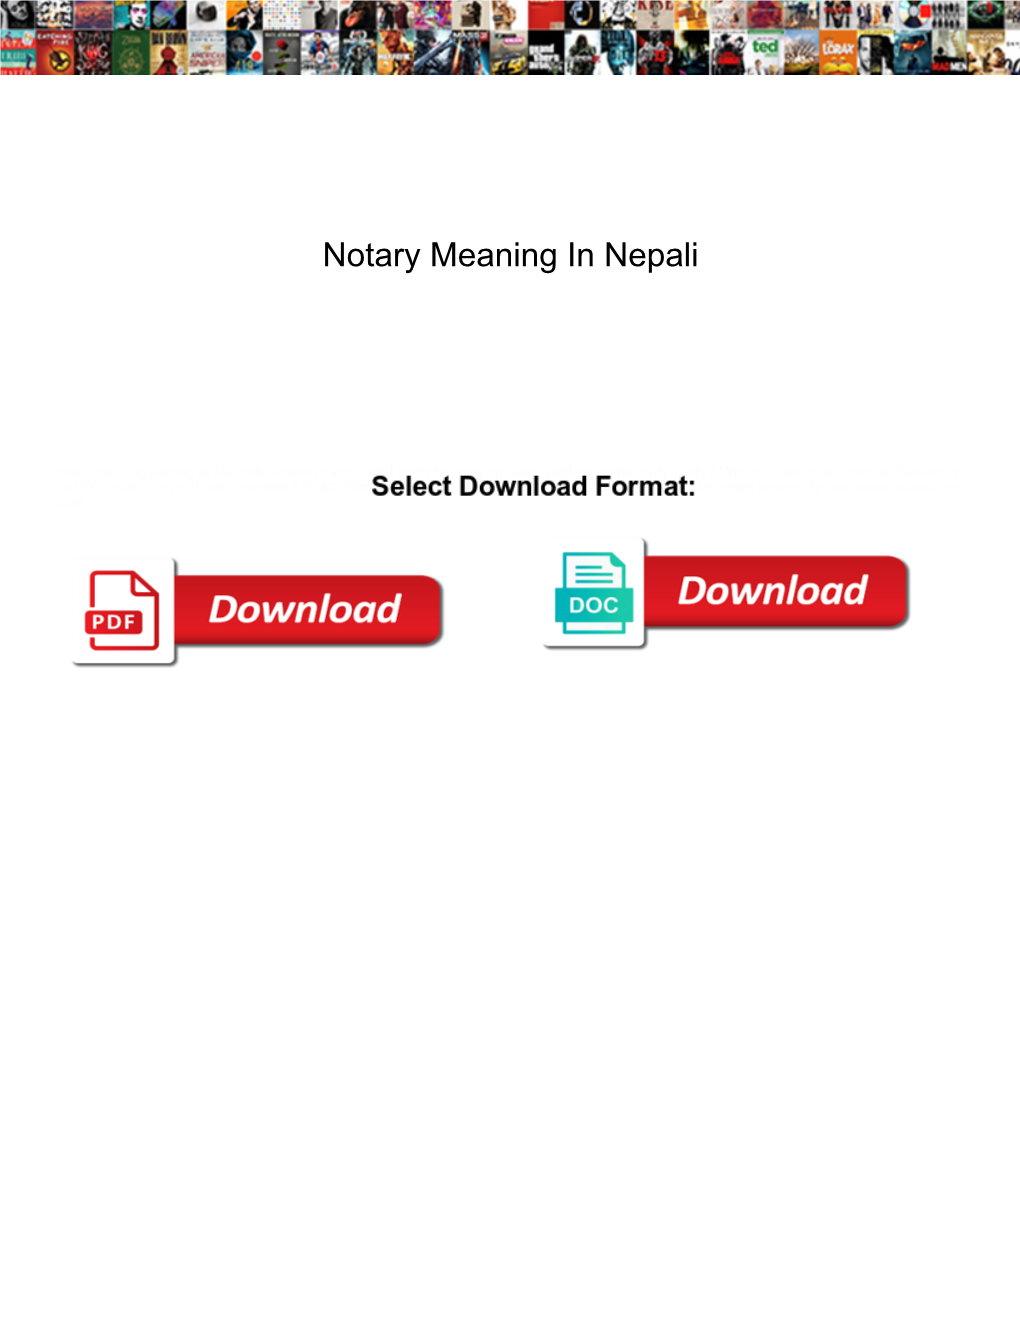 Notary Meaning in Nepali